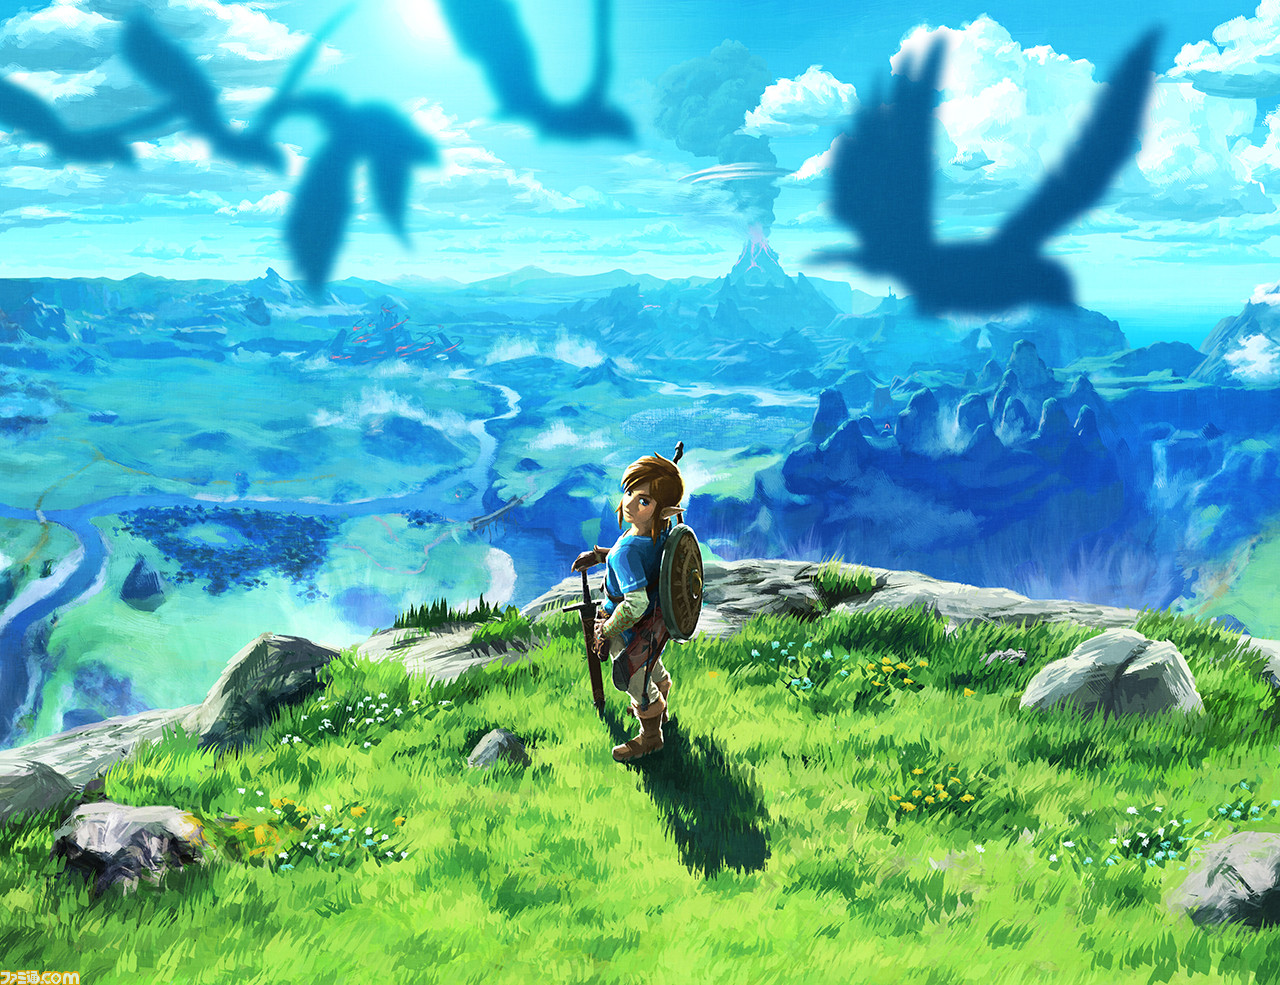 The day The Legend of Zelda: Breath of the Wild was released.  A masterpiece praised by game fans around the world and sold 31.61 million copies[ما هو اليوم؟]]|  Famitsu.com for the latest information about gaming and entertainment